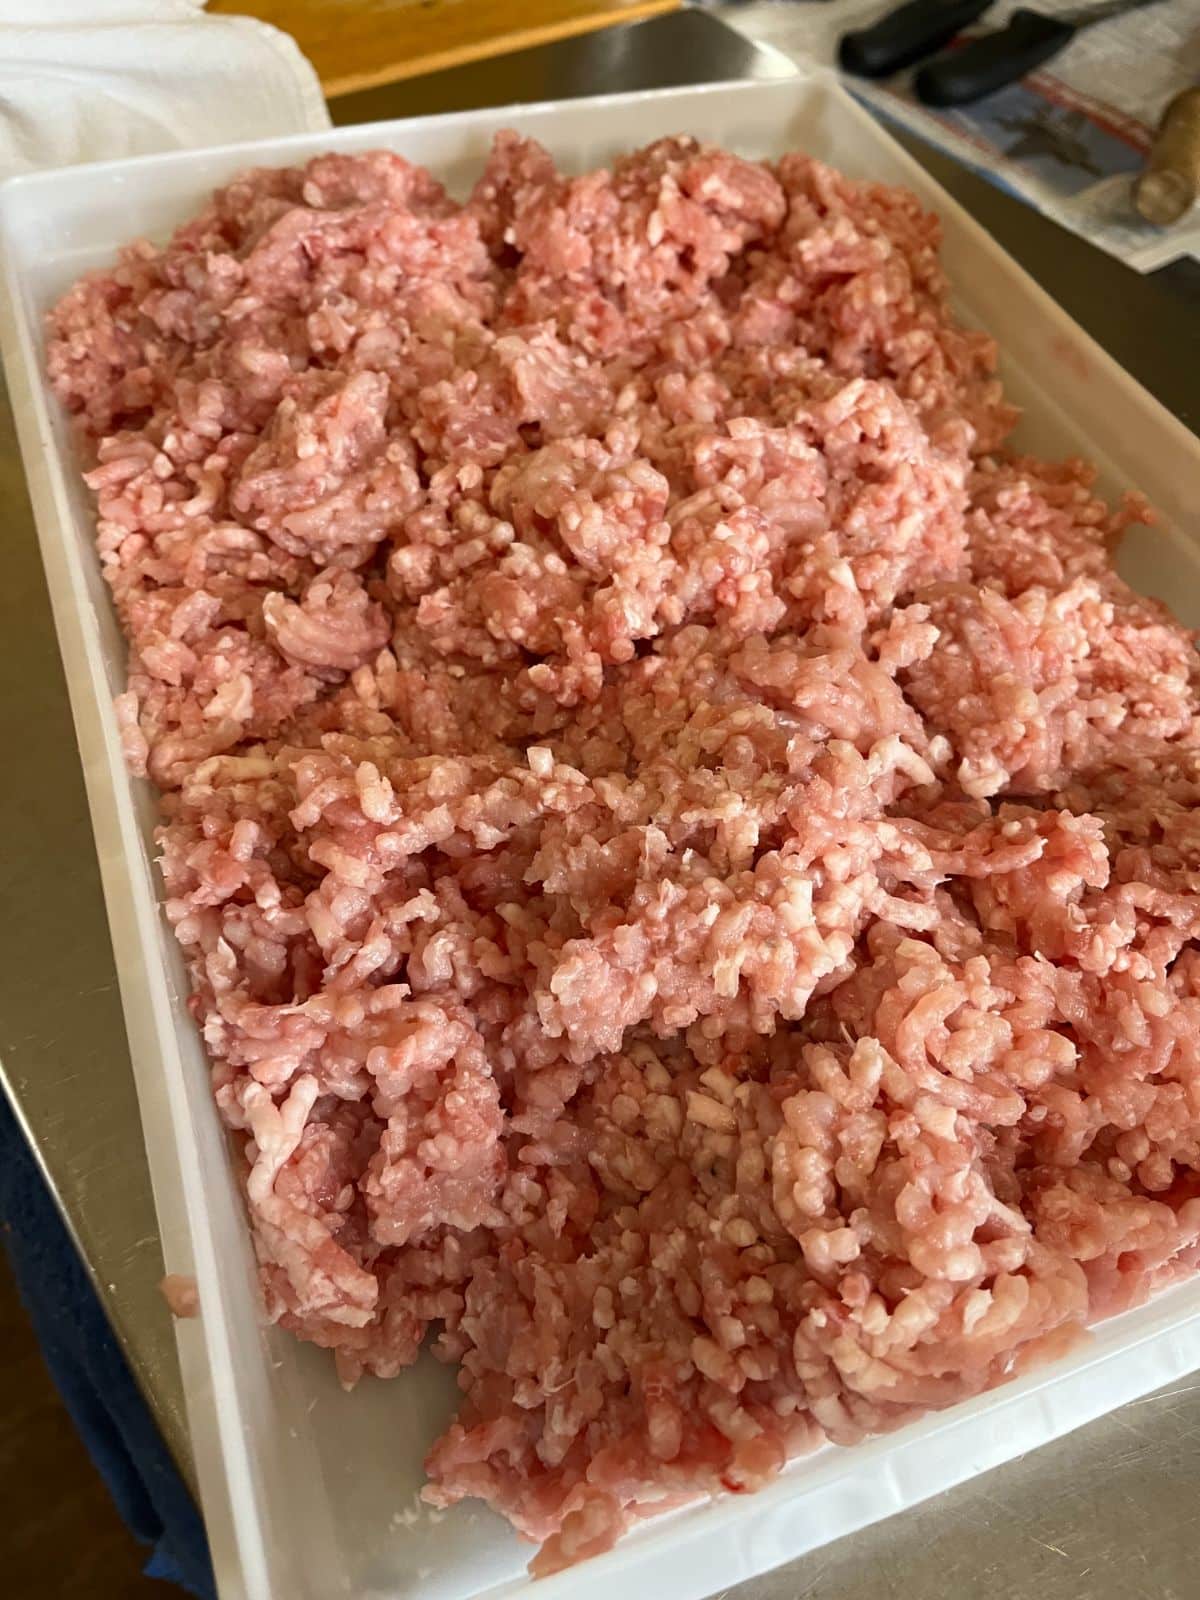 Coarse ground rabbit meat in a tray